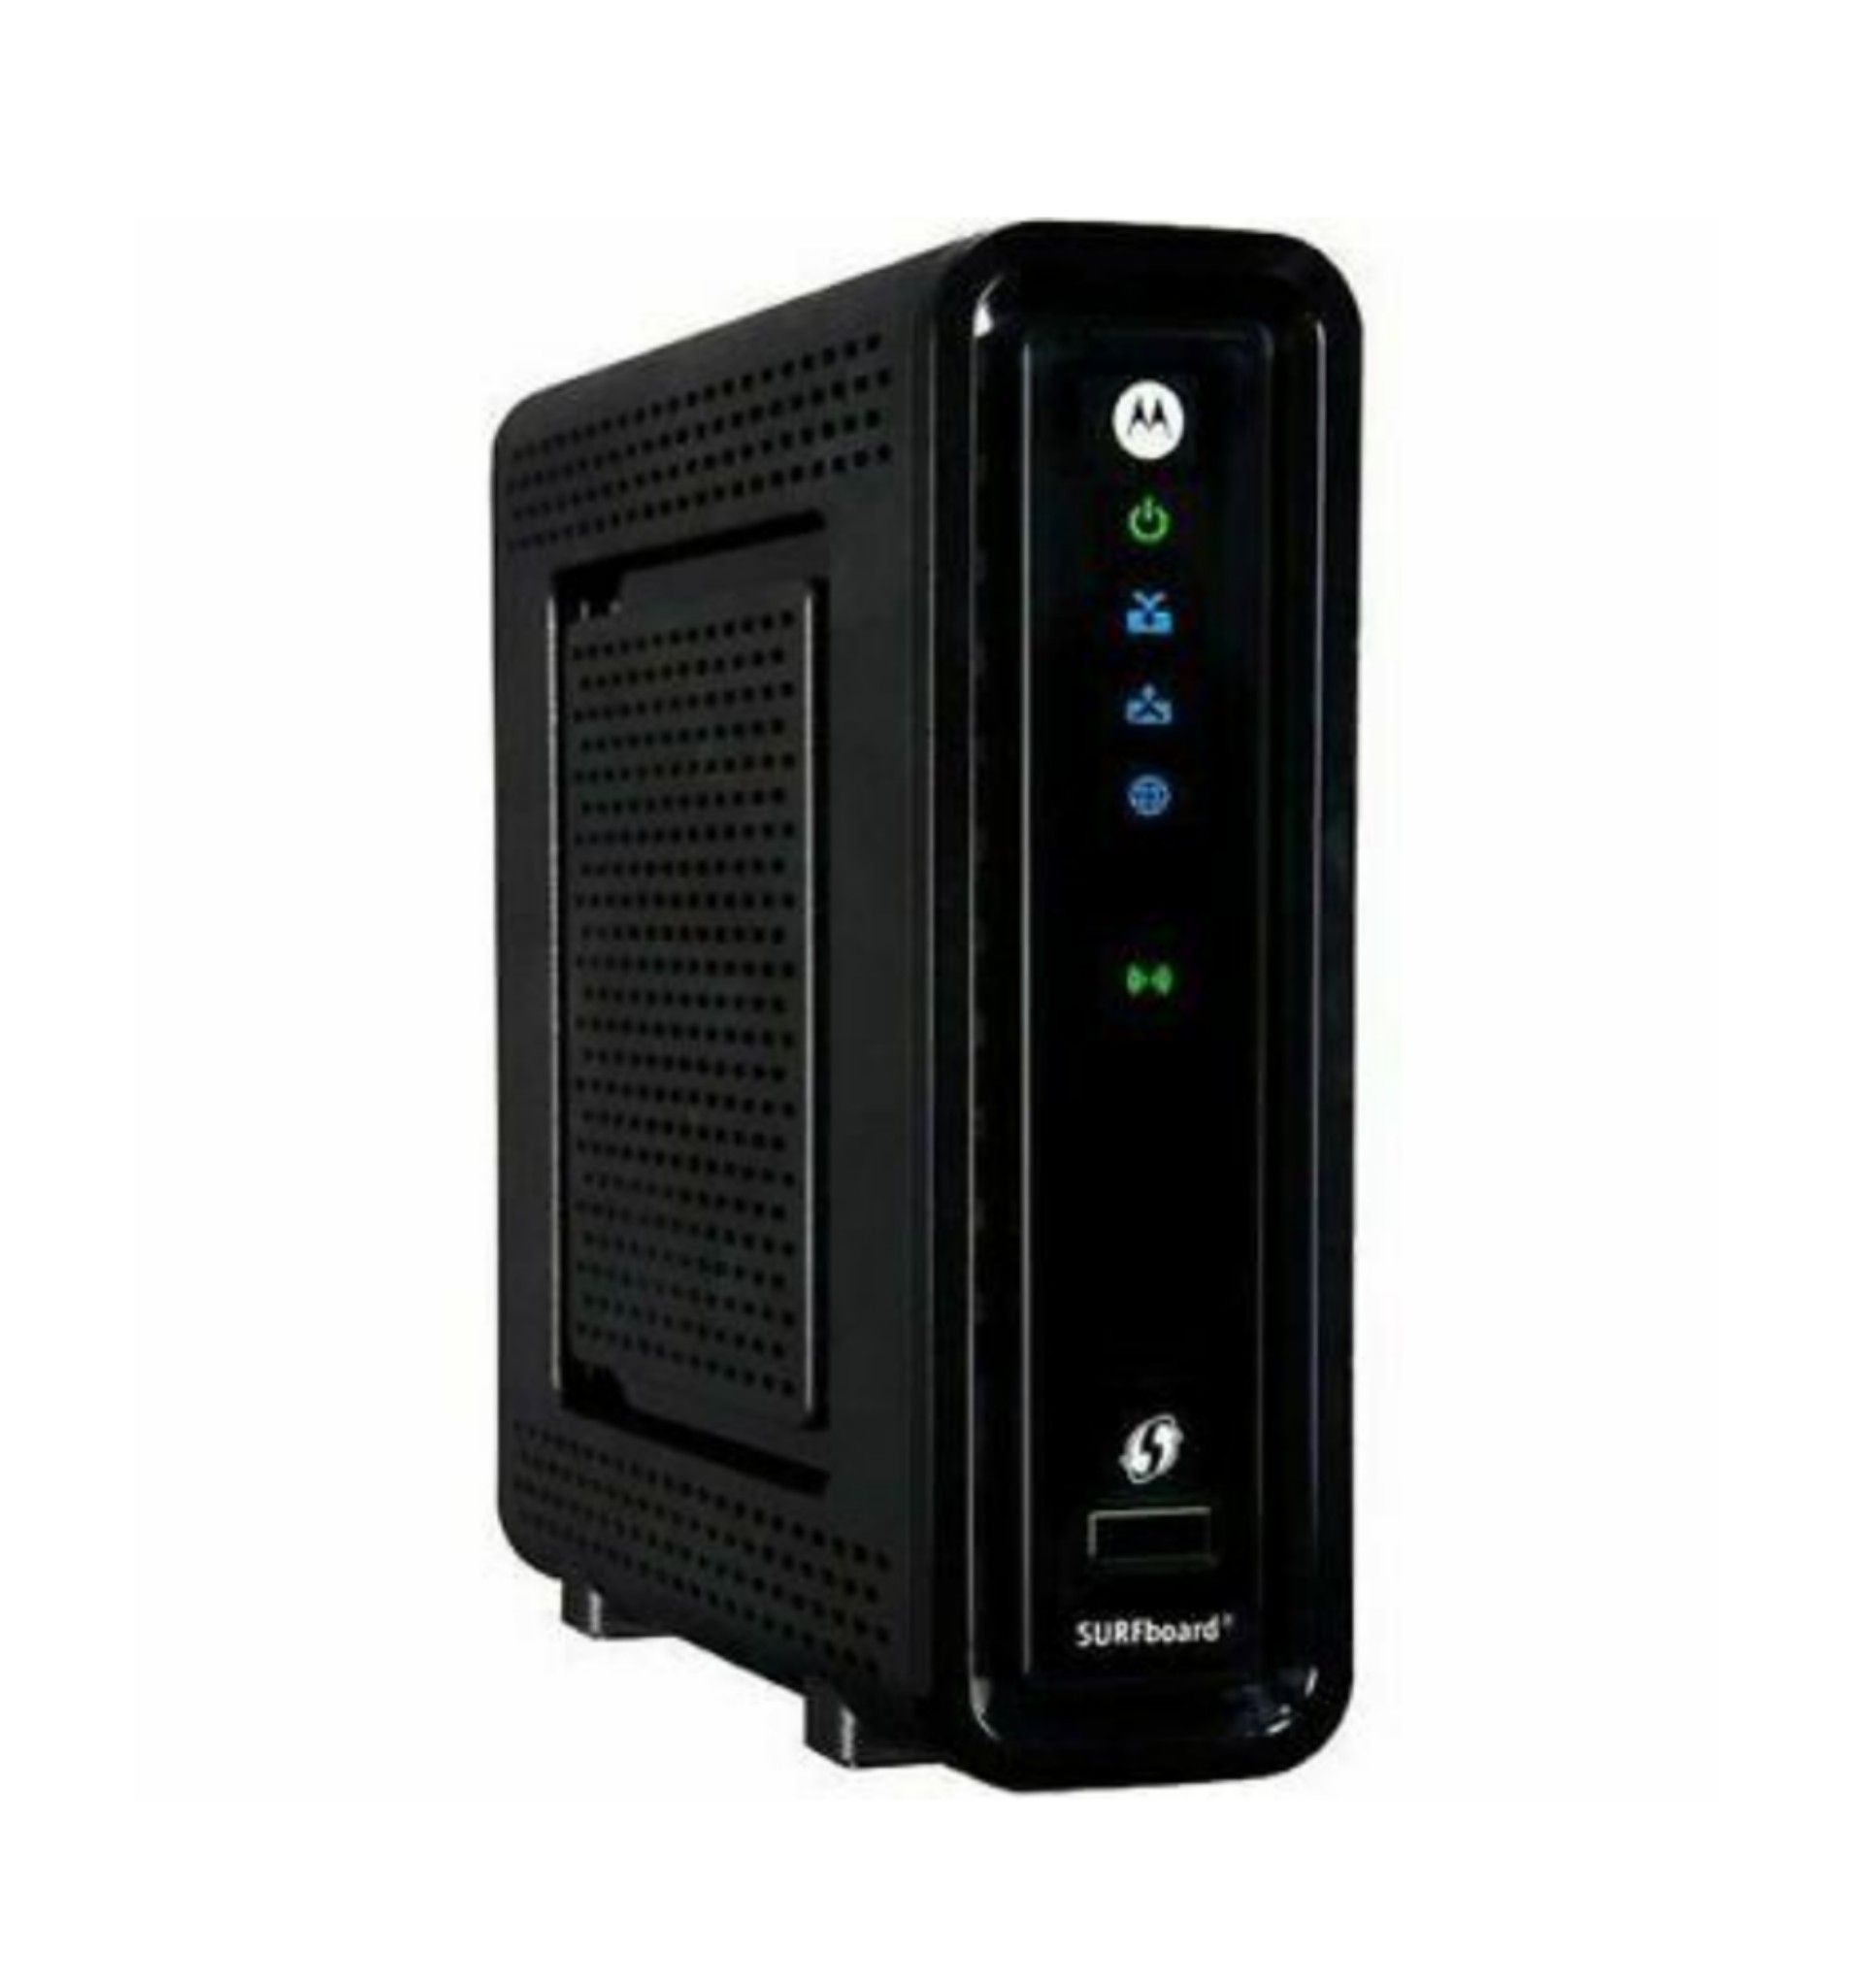 Cable Modem + Router compatible with Comcast